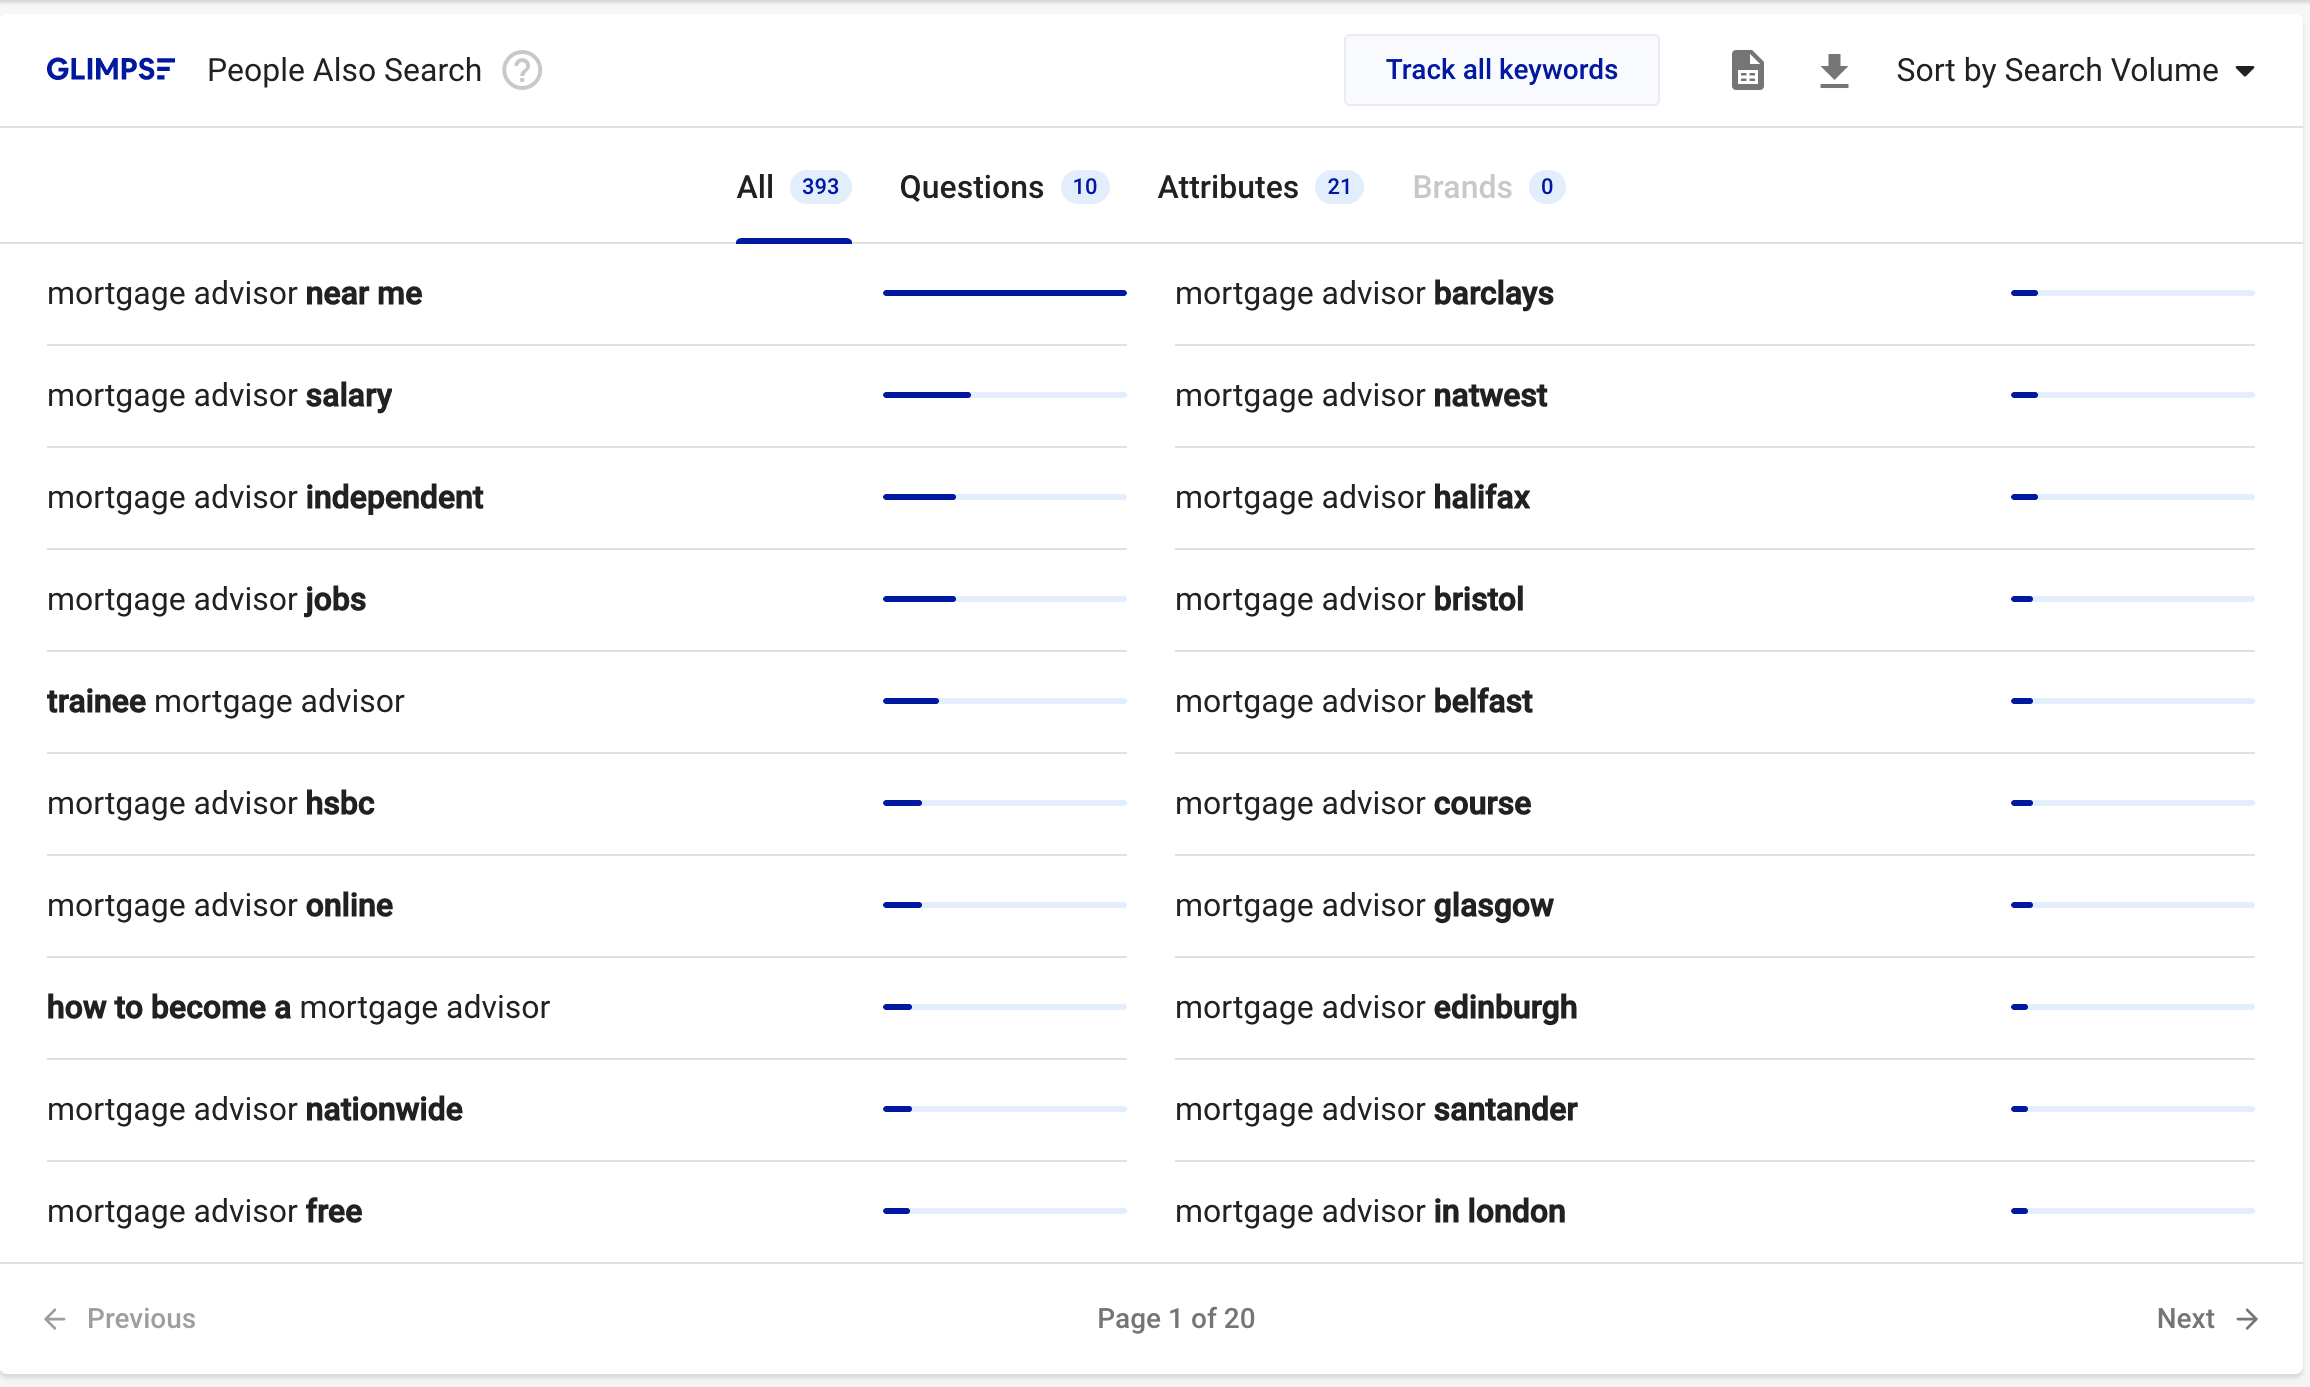 List of "People Also Search" keywords related to "Mortgage advisor"